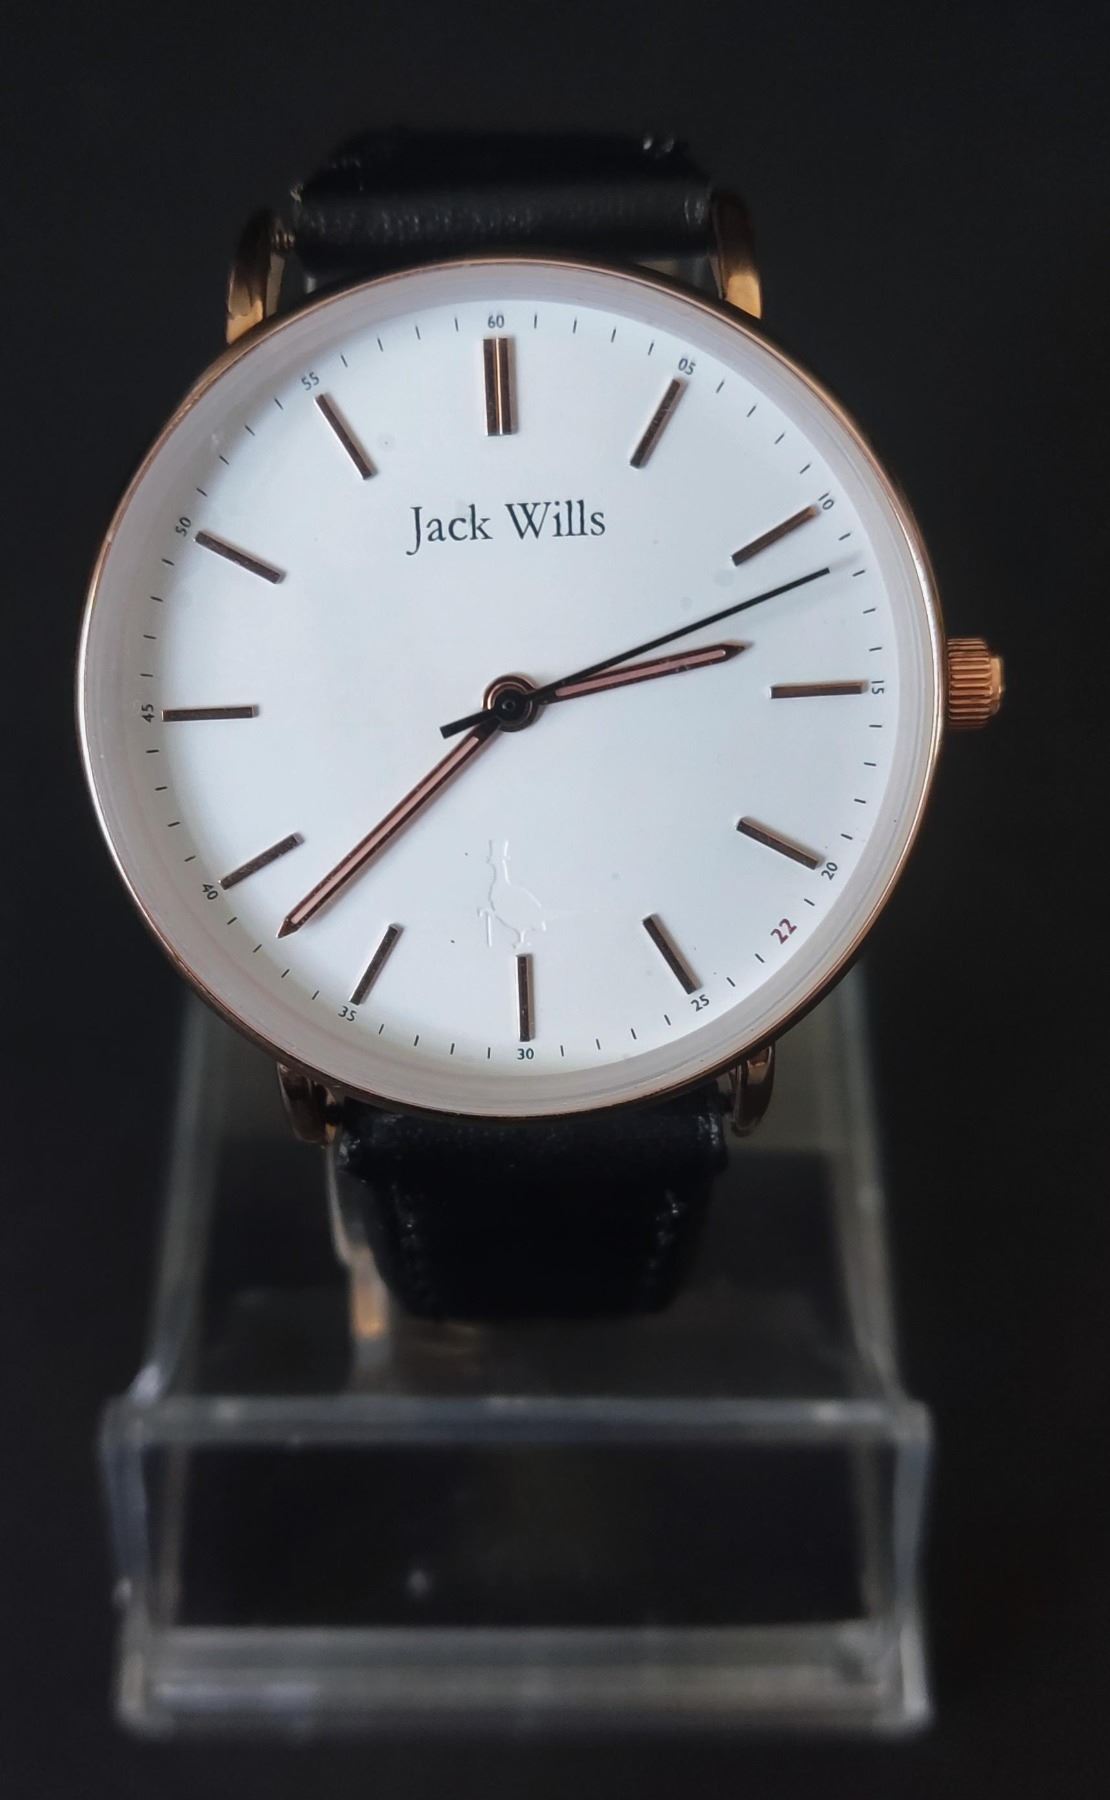 Brand new Jack Wills rose gold plated watch (JW018FLWH) With black Leather strap. Battery included.